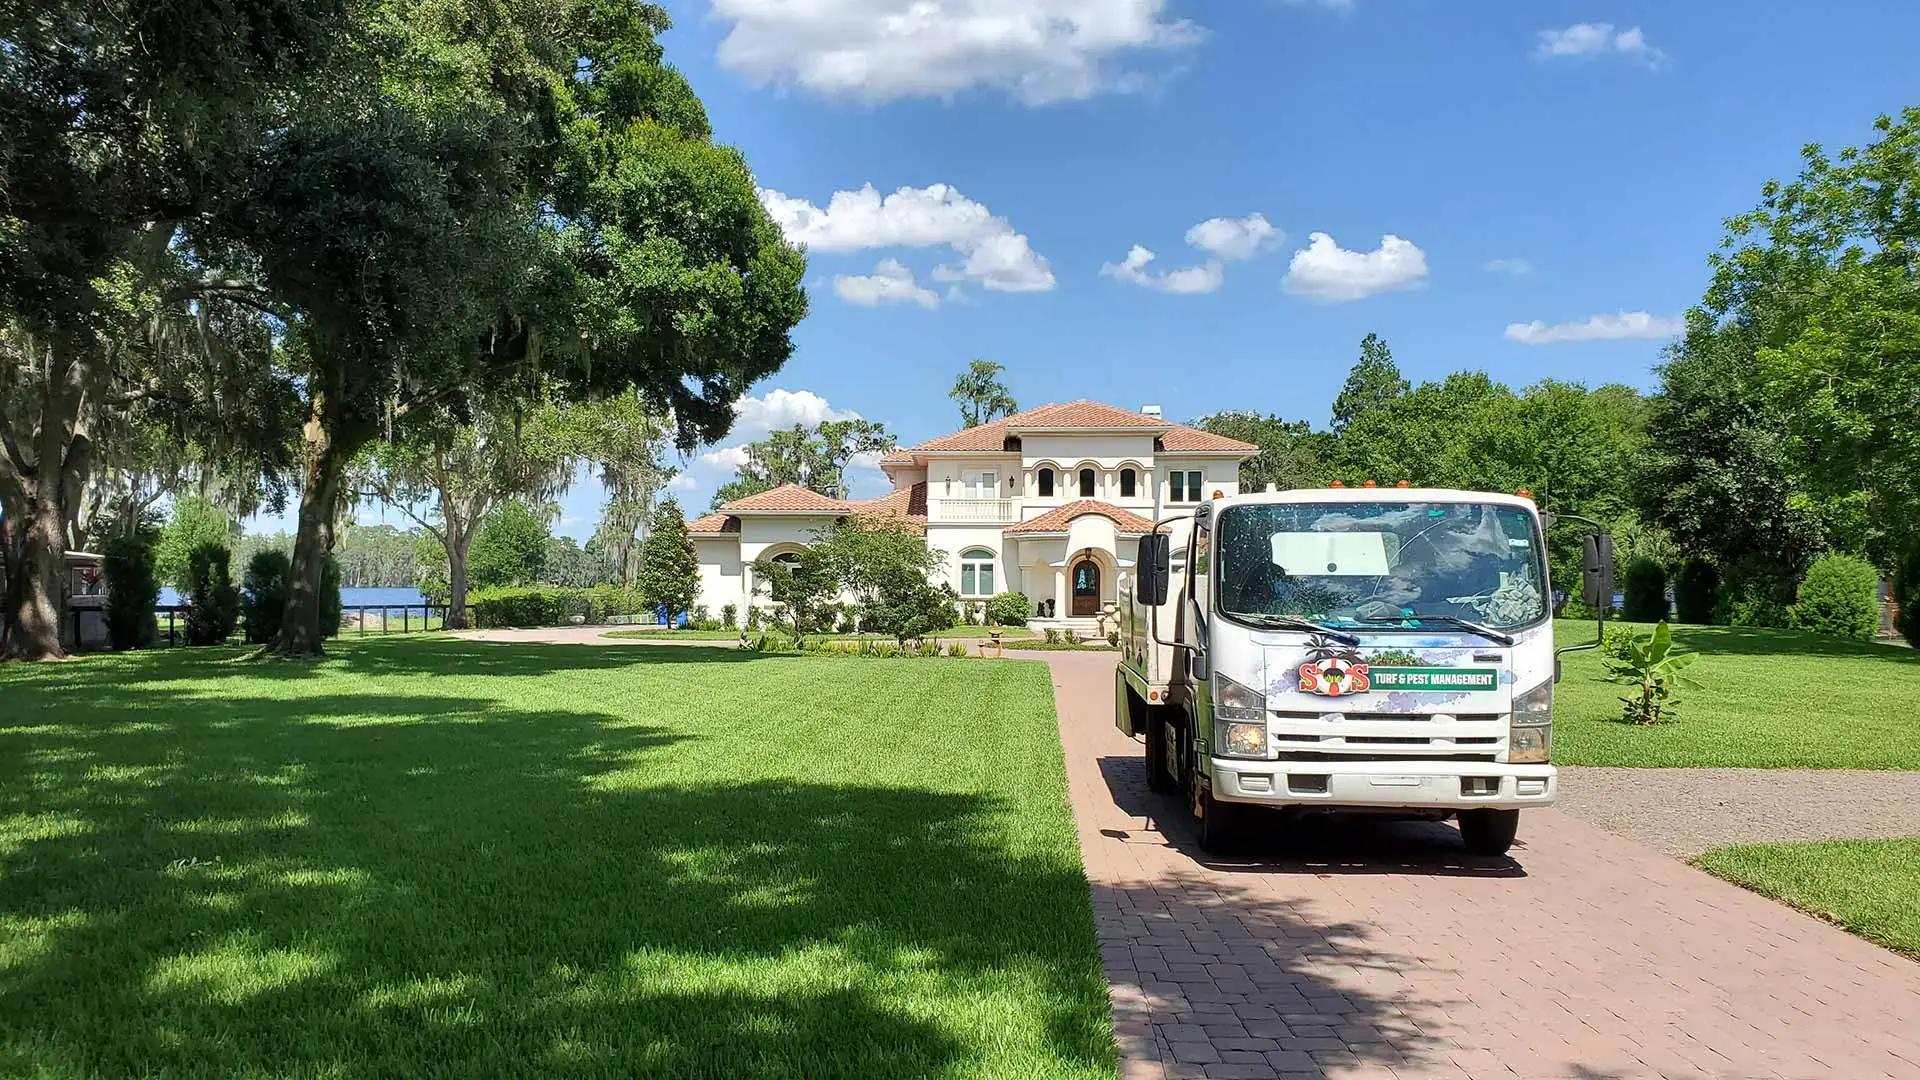 S.O.S. Turf & Pest servicing upscale residential home for lawn care.